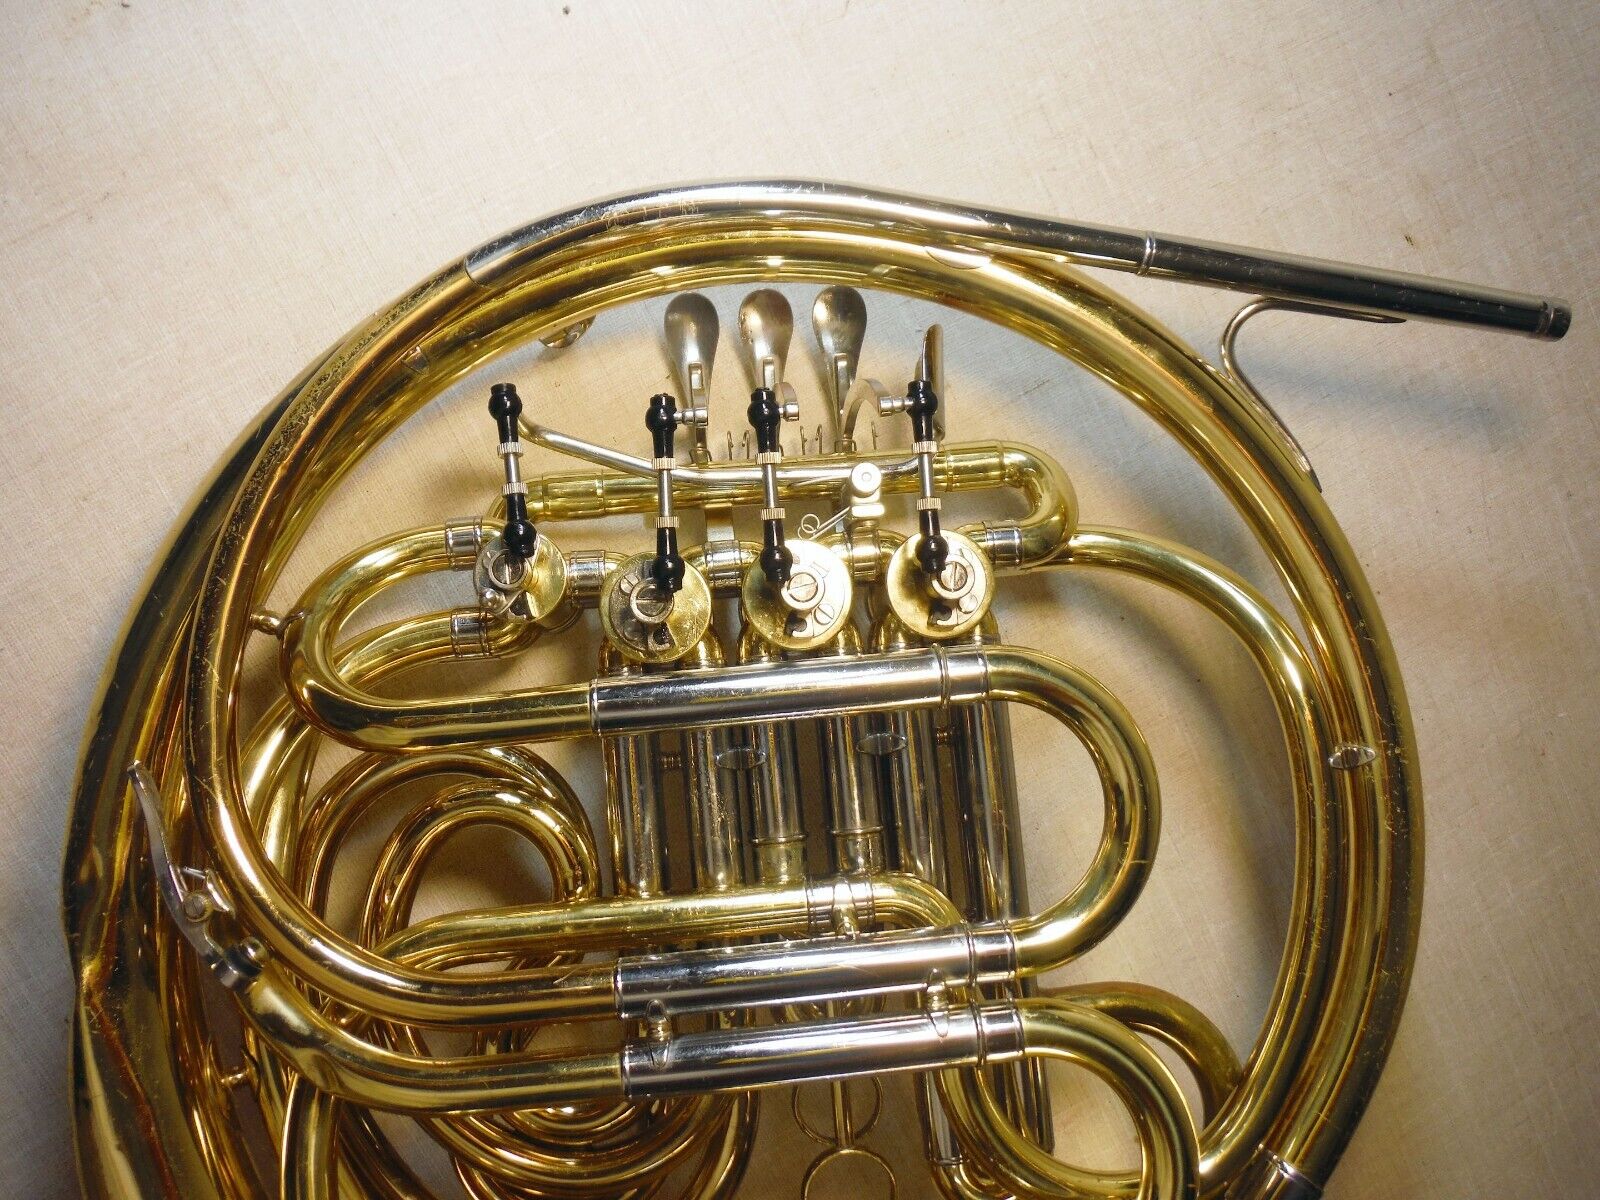 JUPITER JHR-852 DOUBLE FRENCH HORN BRASS WORKING GOOD W/DENTS CASE MOUTHPIECE 7